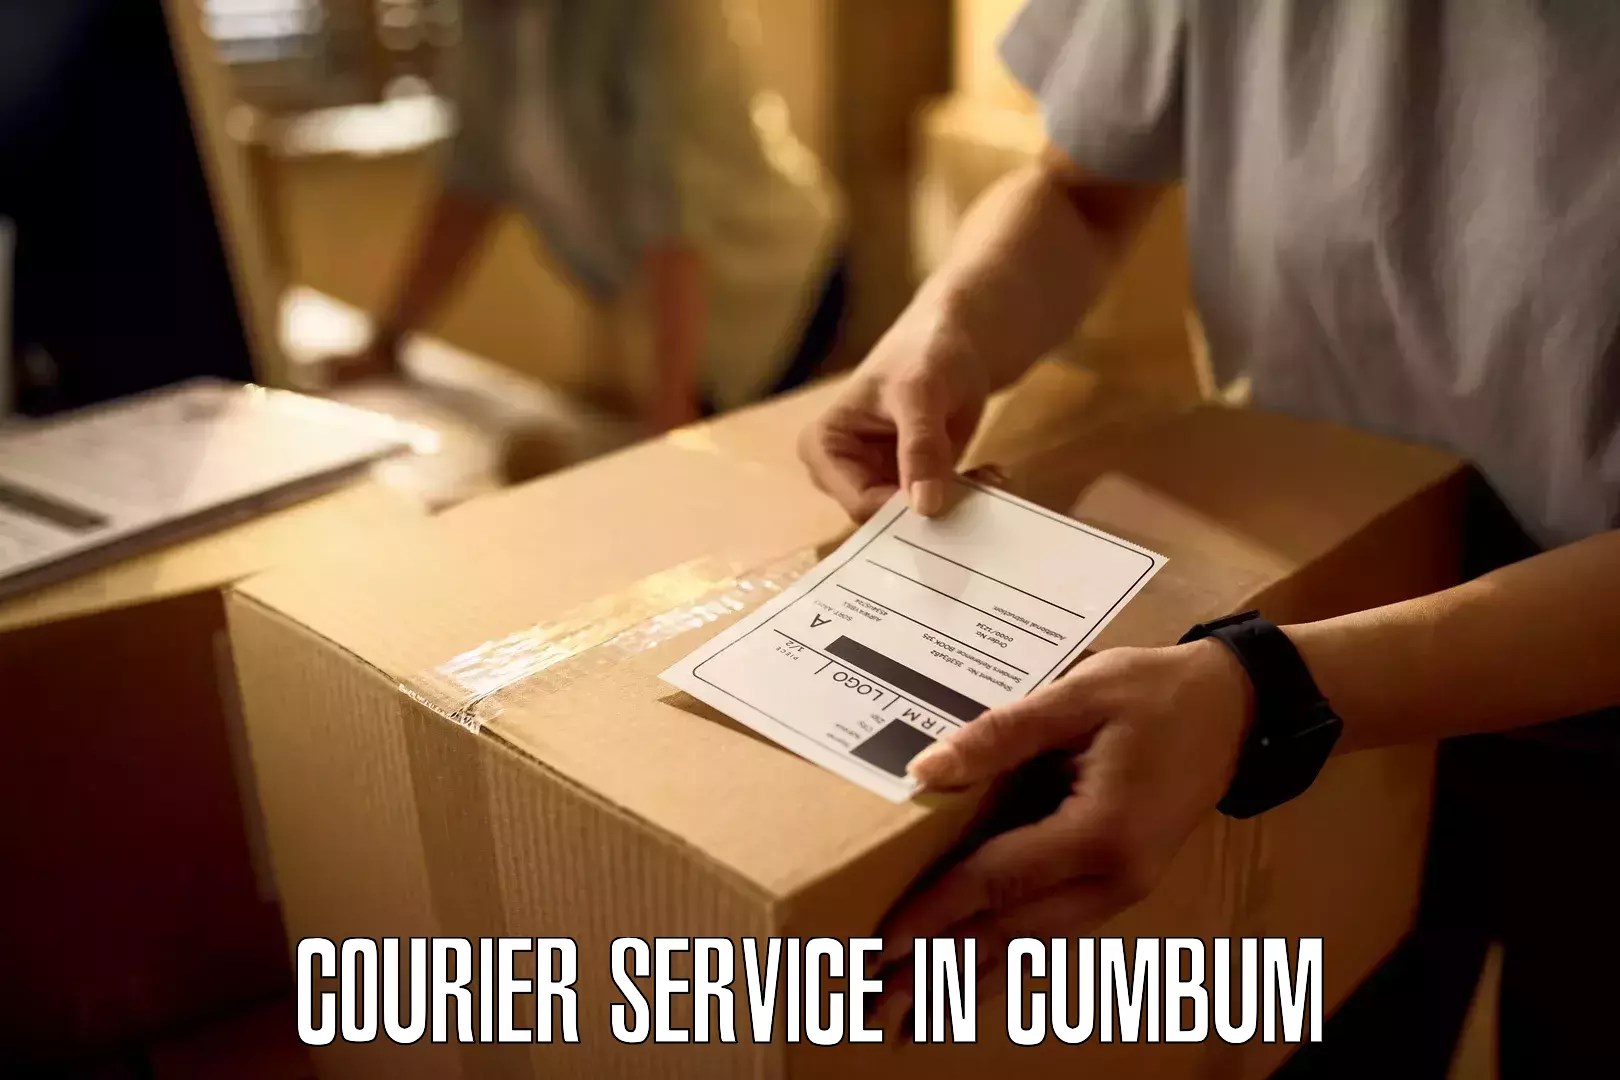 Rapid shipping services in Cumbum